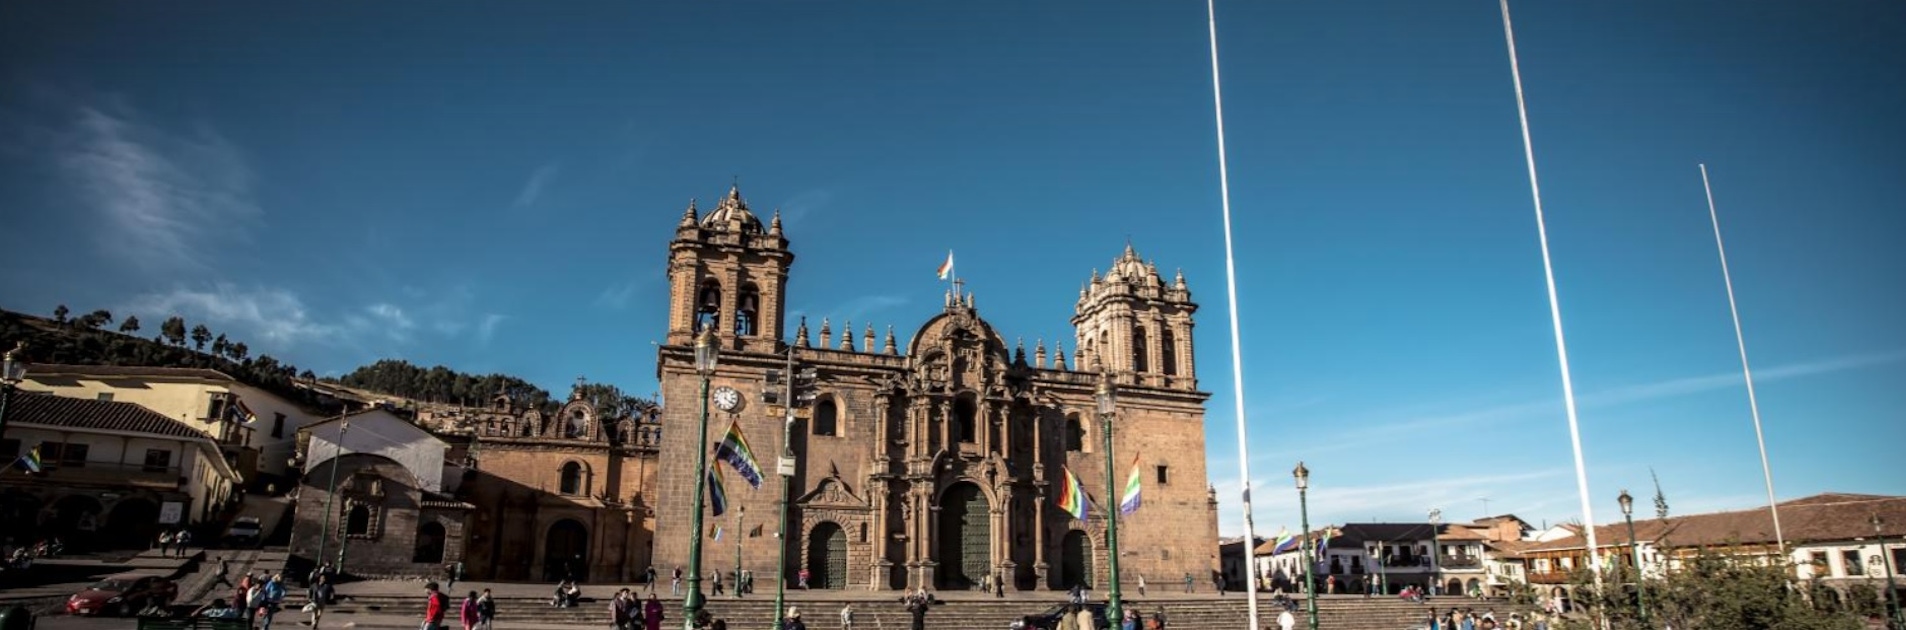 Monument visits in Cusco  musement